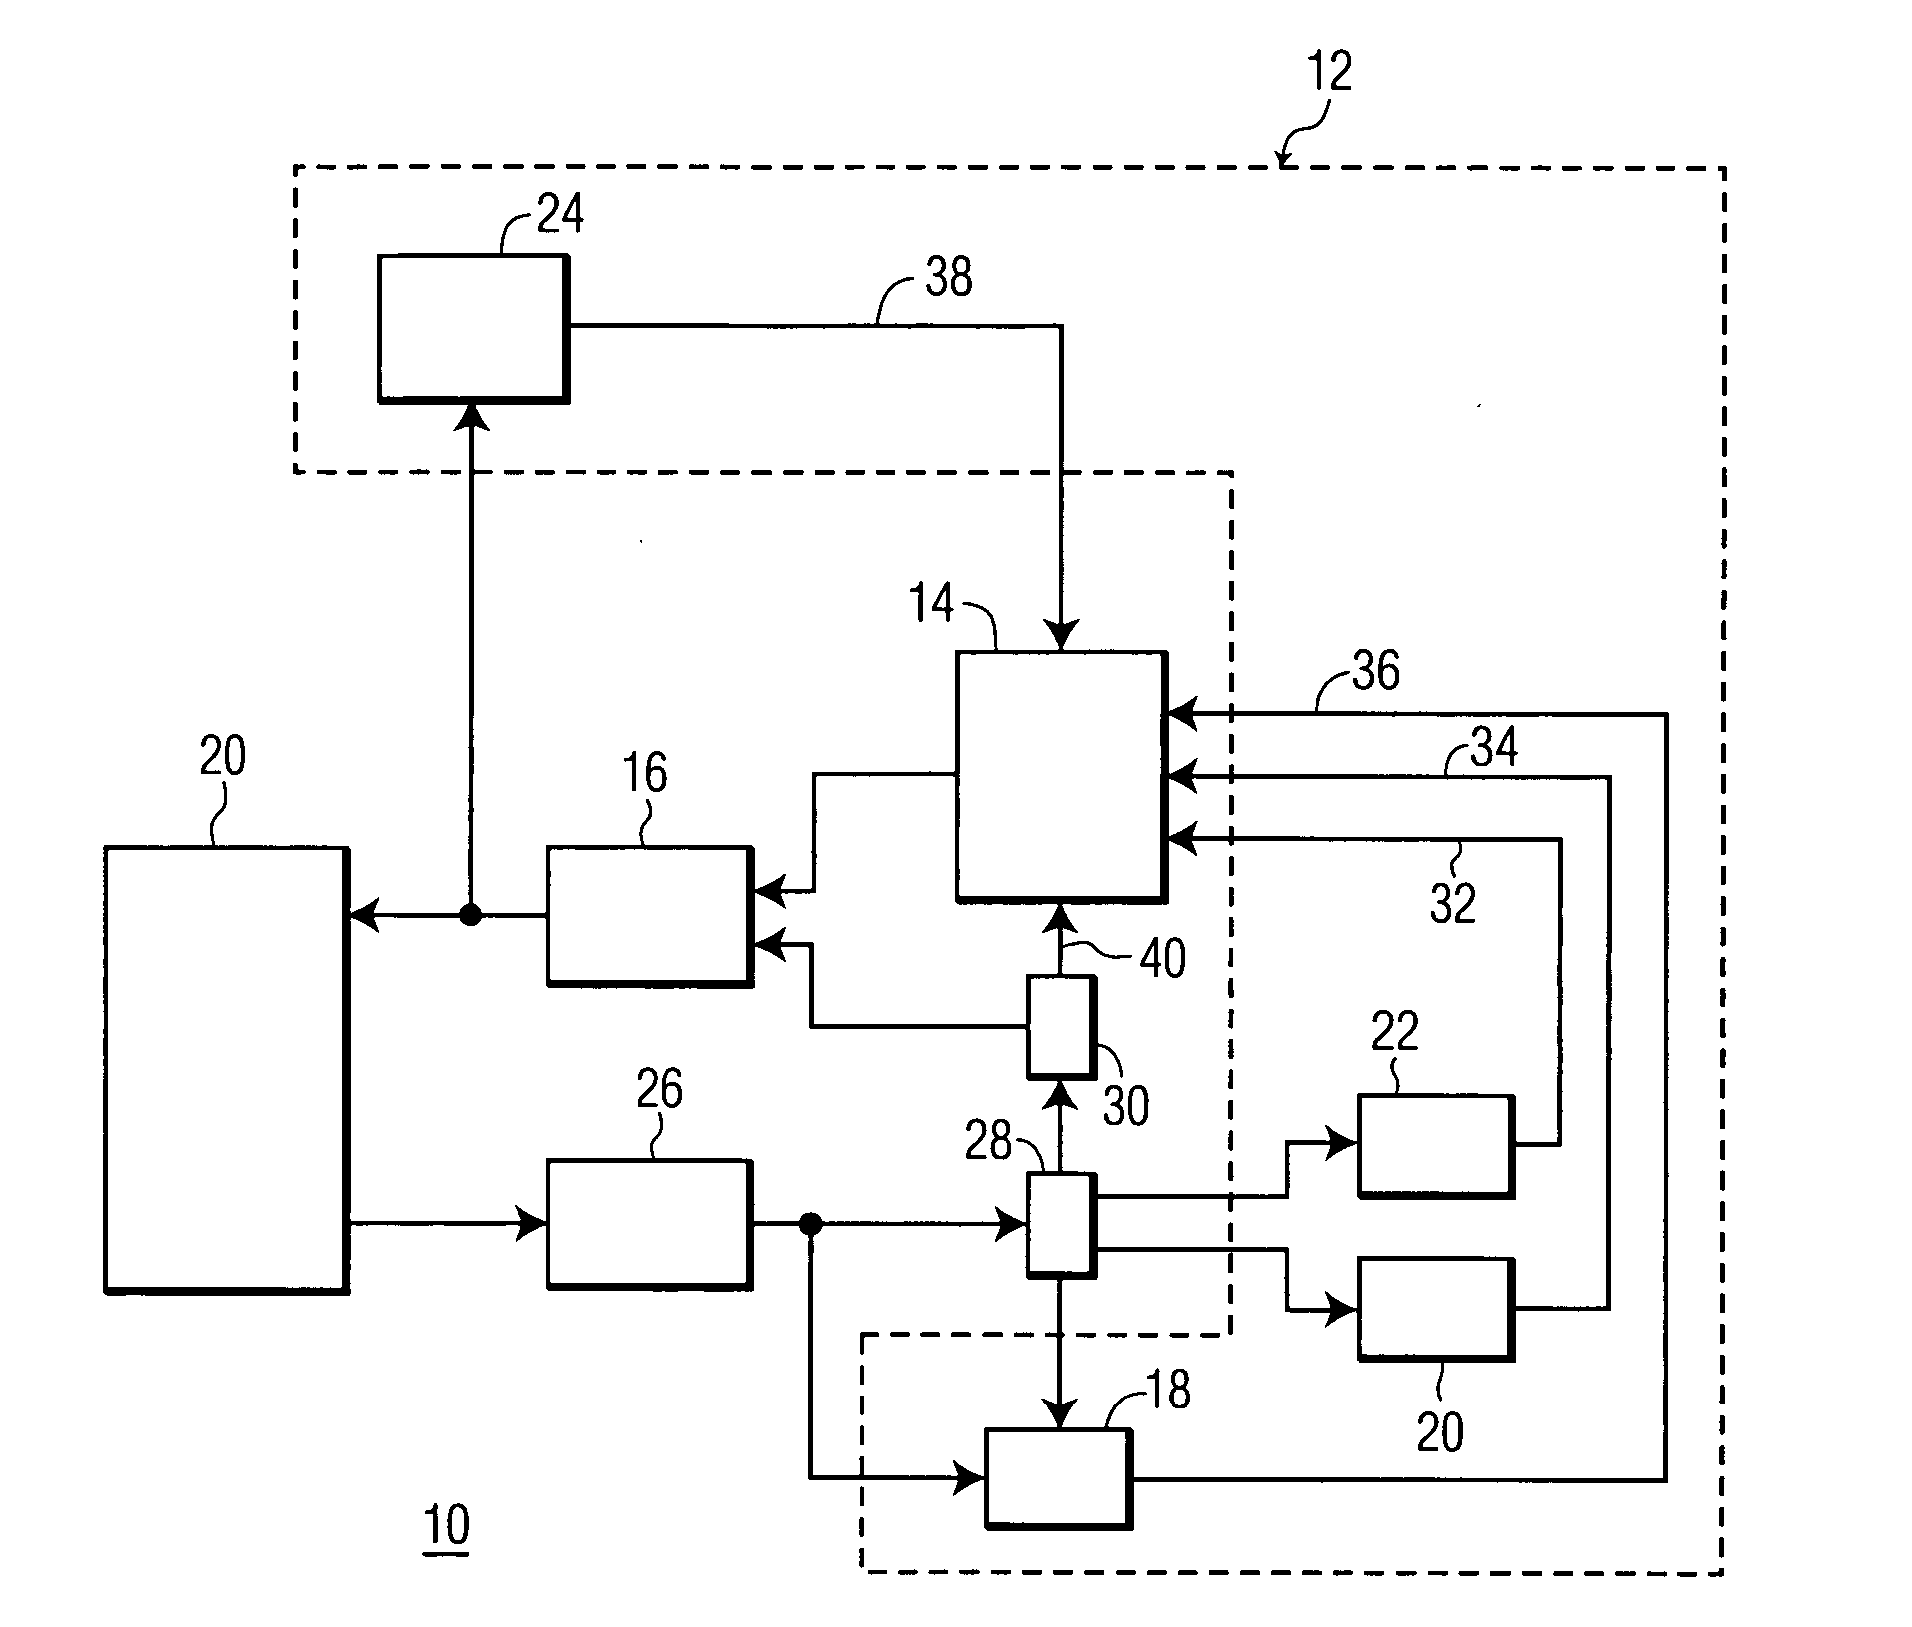 Methods and apparatuses for transmission power control in a wireless communication system